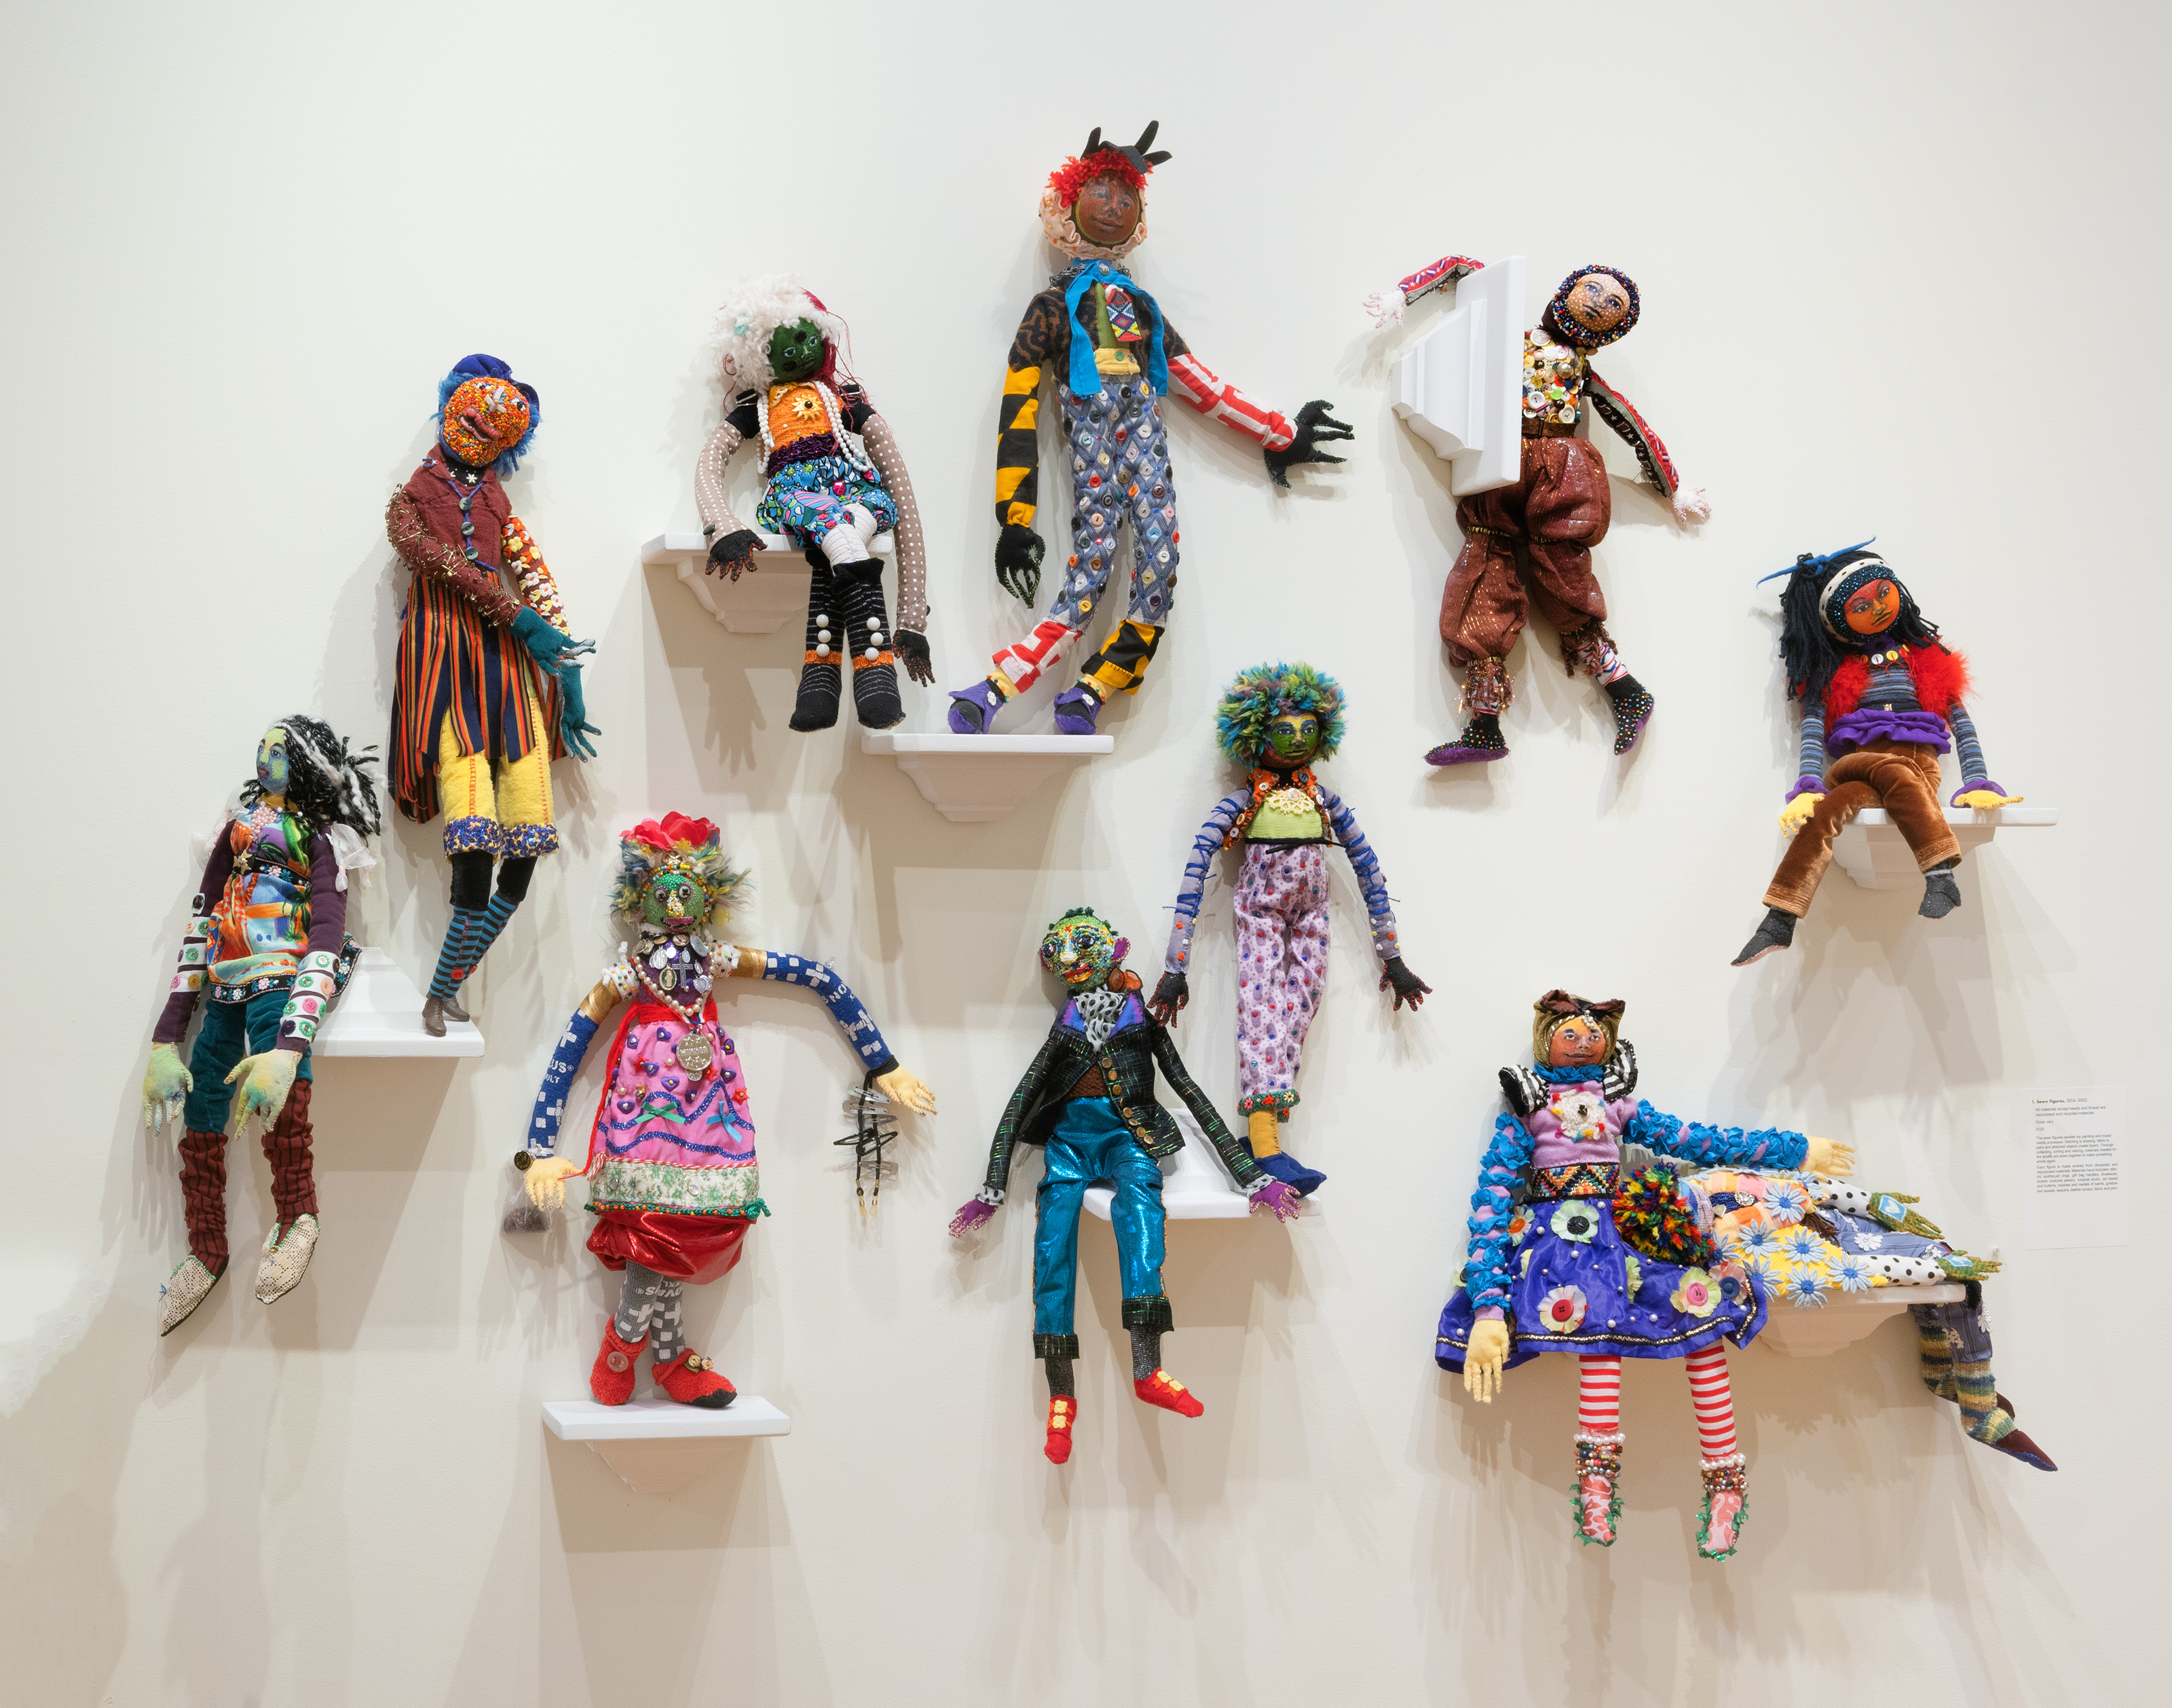 sewn figures, hand sewing, looping stitch, recycling, repurposing, fabric, textiles, layering, hand-made, bringing pieces together, thread, landfill, stitching as drawing, creating wholeness